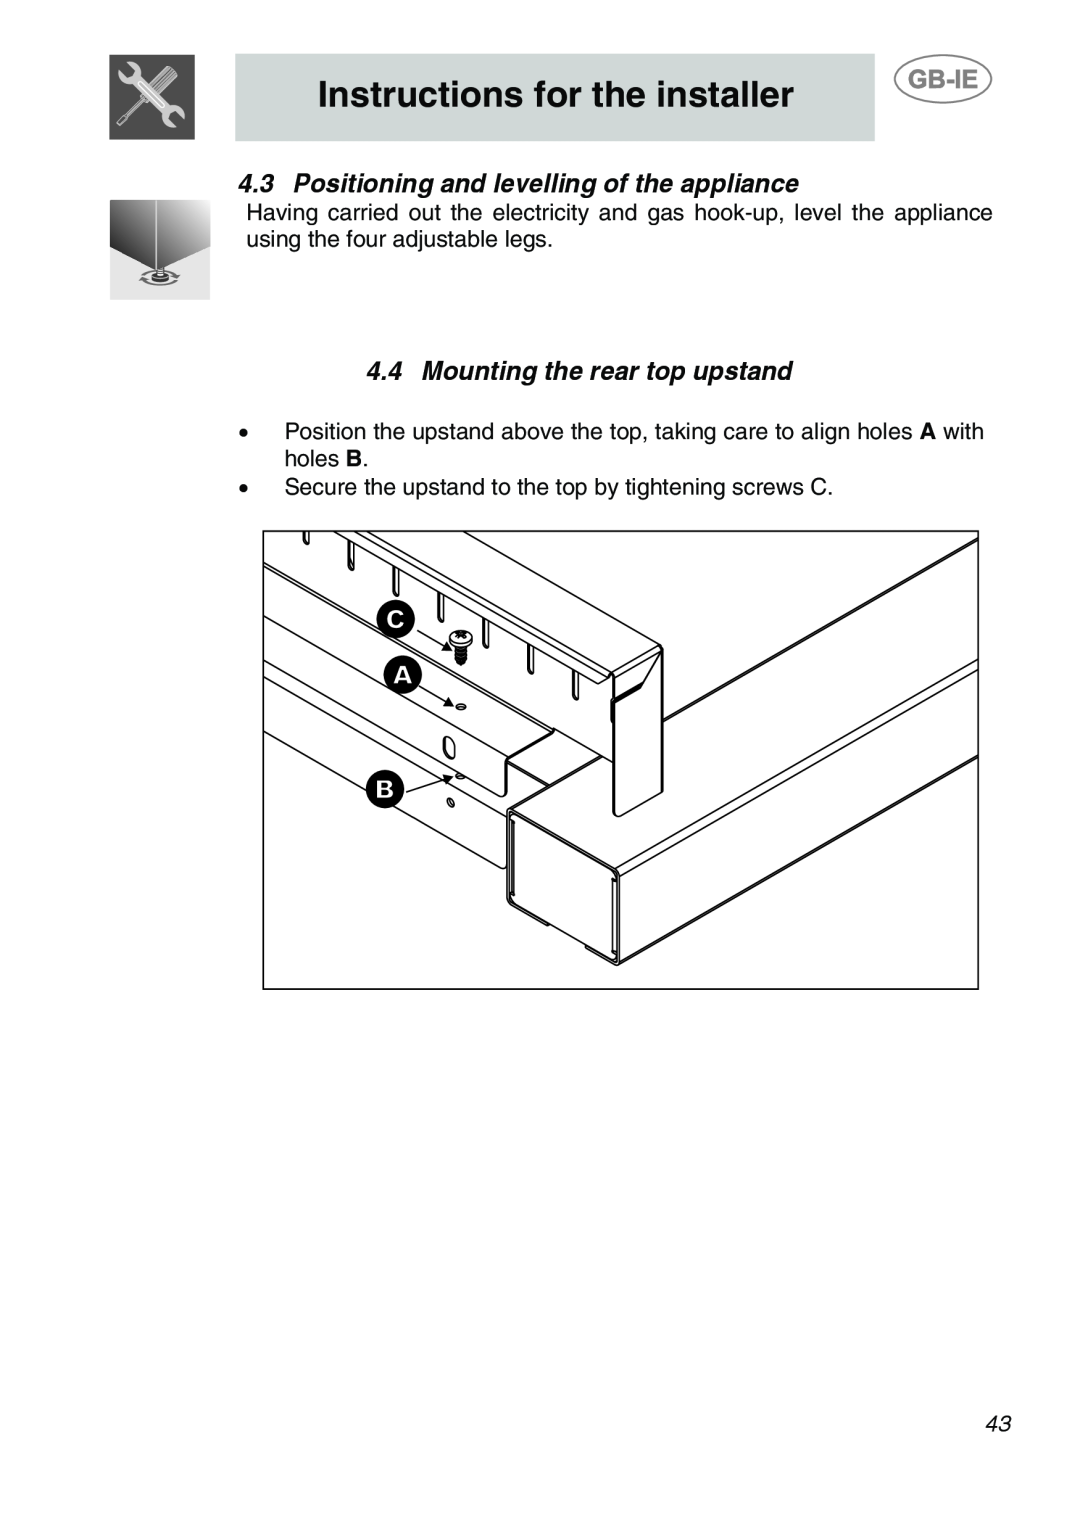 Smeg A1-6 manual Positioning and levelling of the appliance, Mounting the rear top upstand, Instructions for the installer 